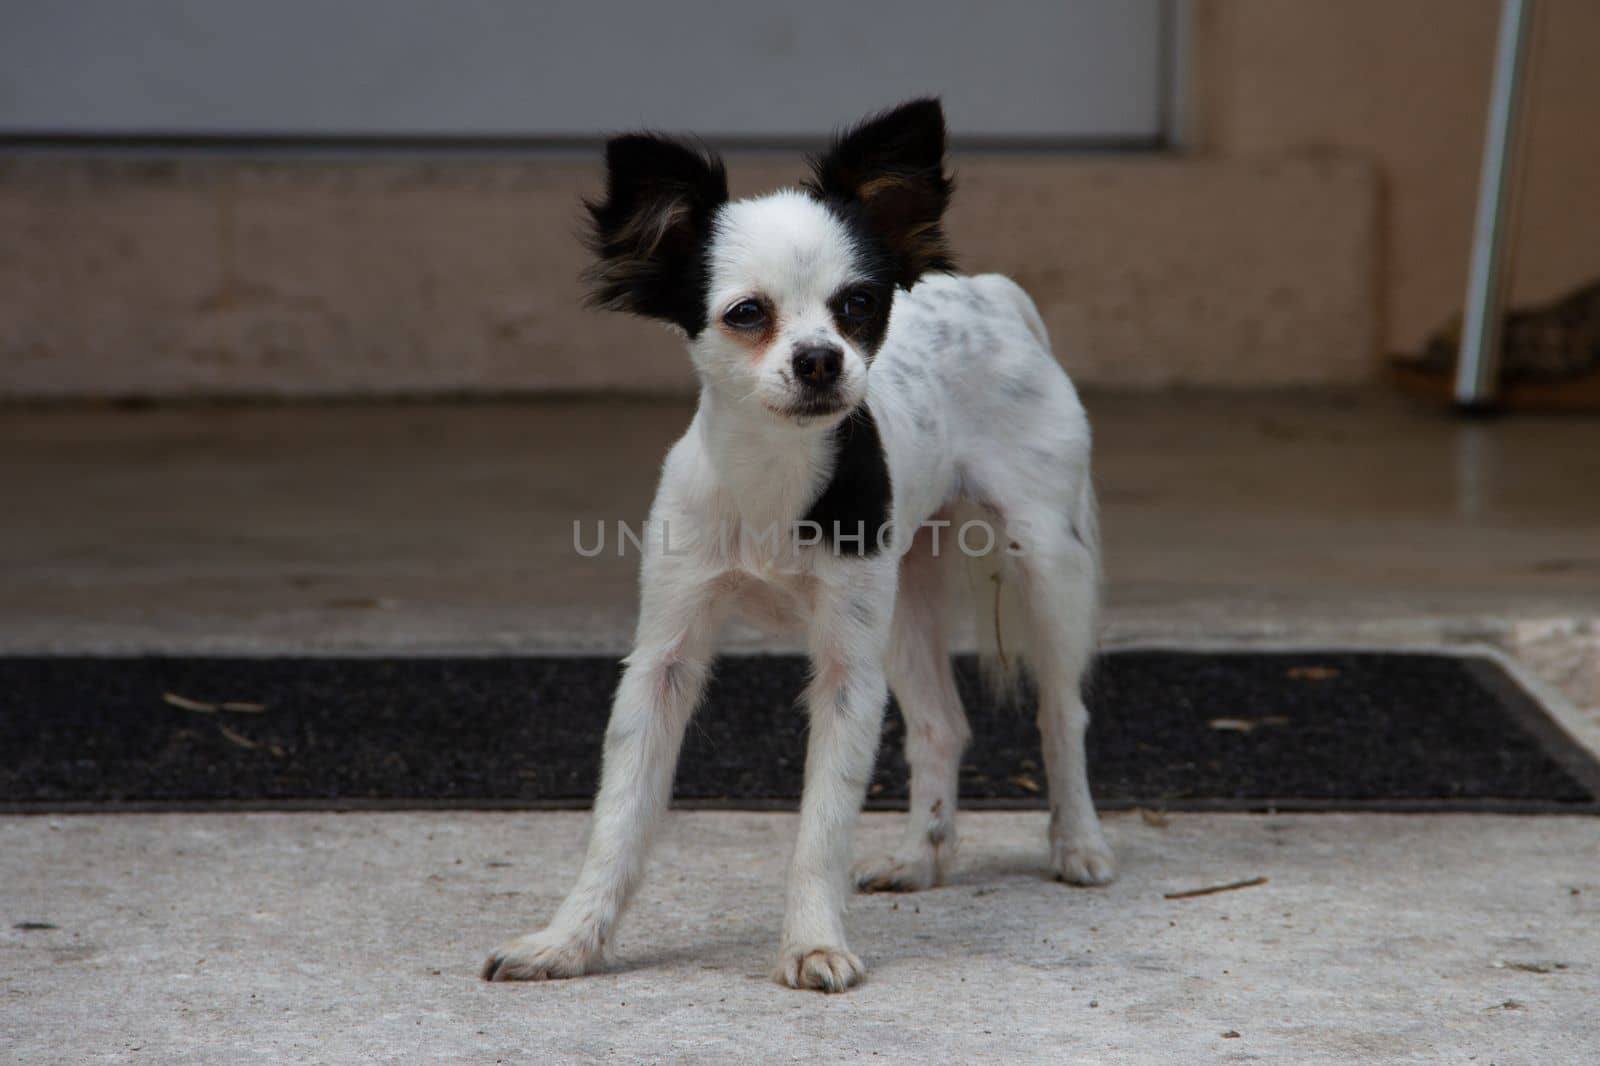 Small black and white terrier type dog standing on cement with ears perked and staring ahead